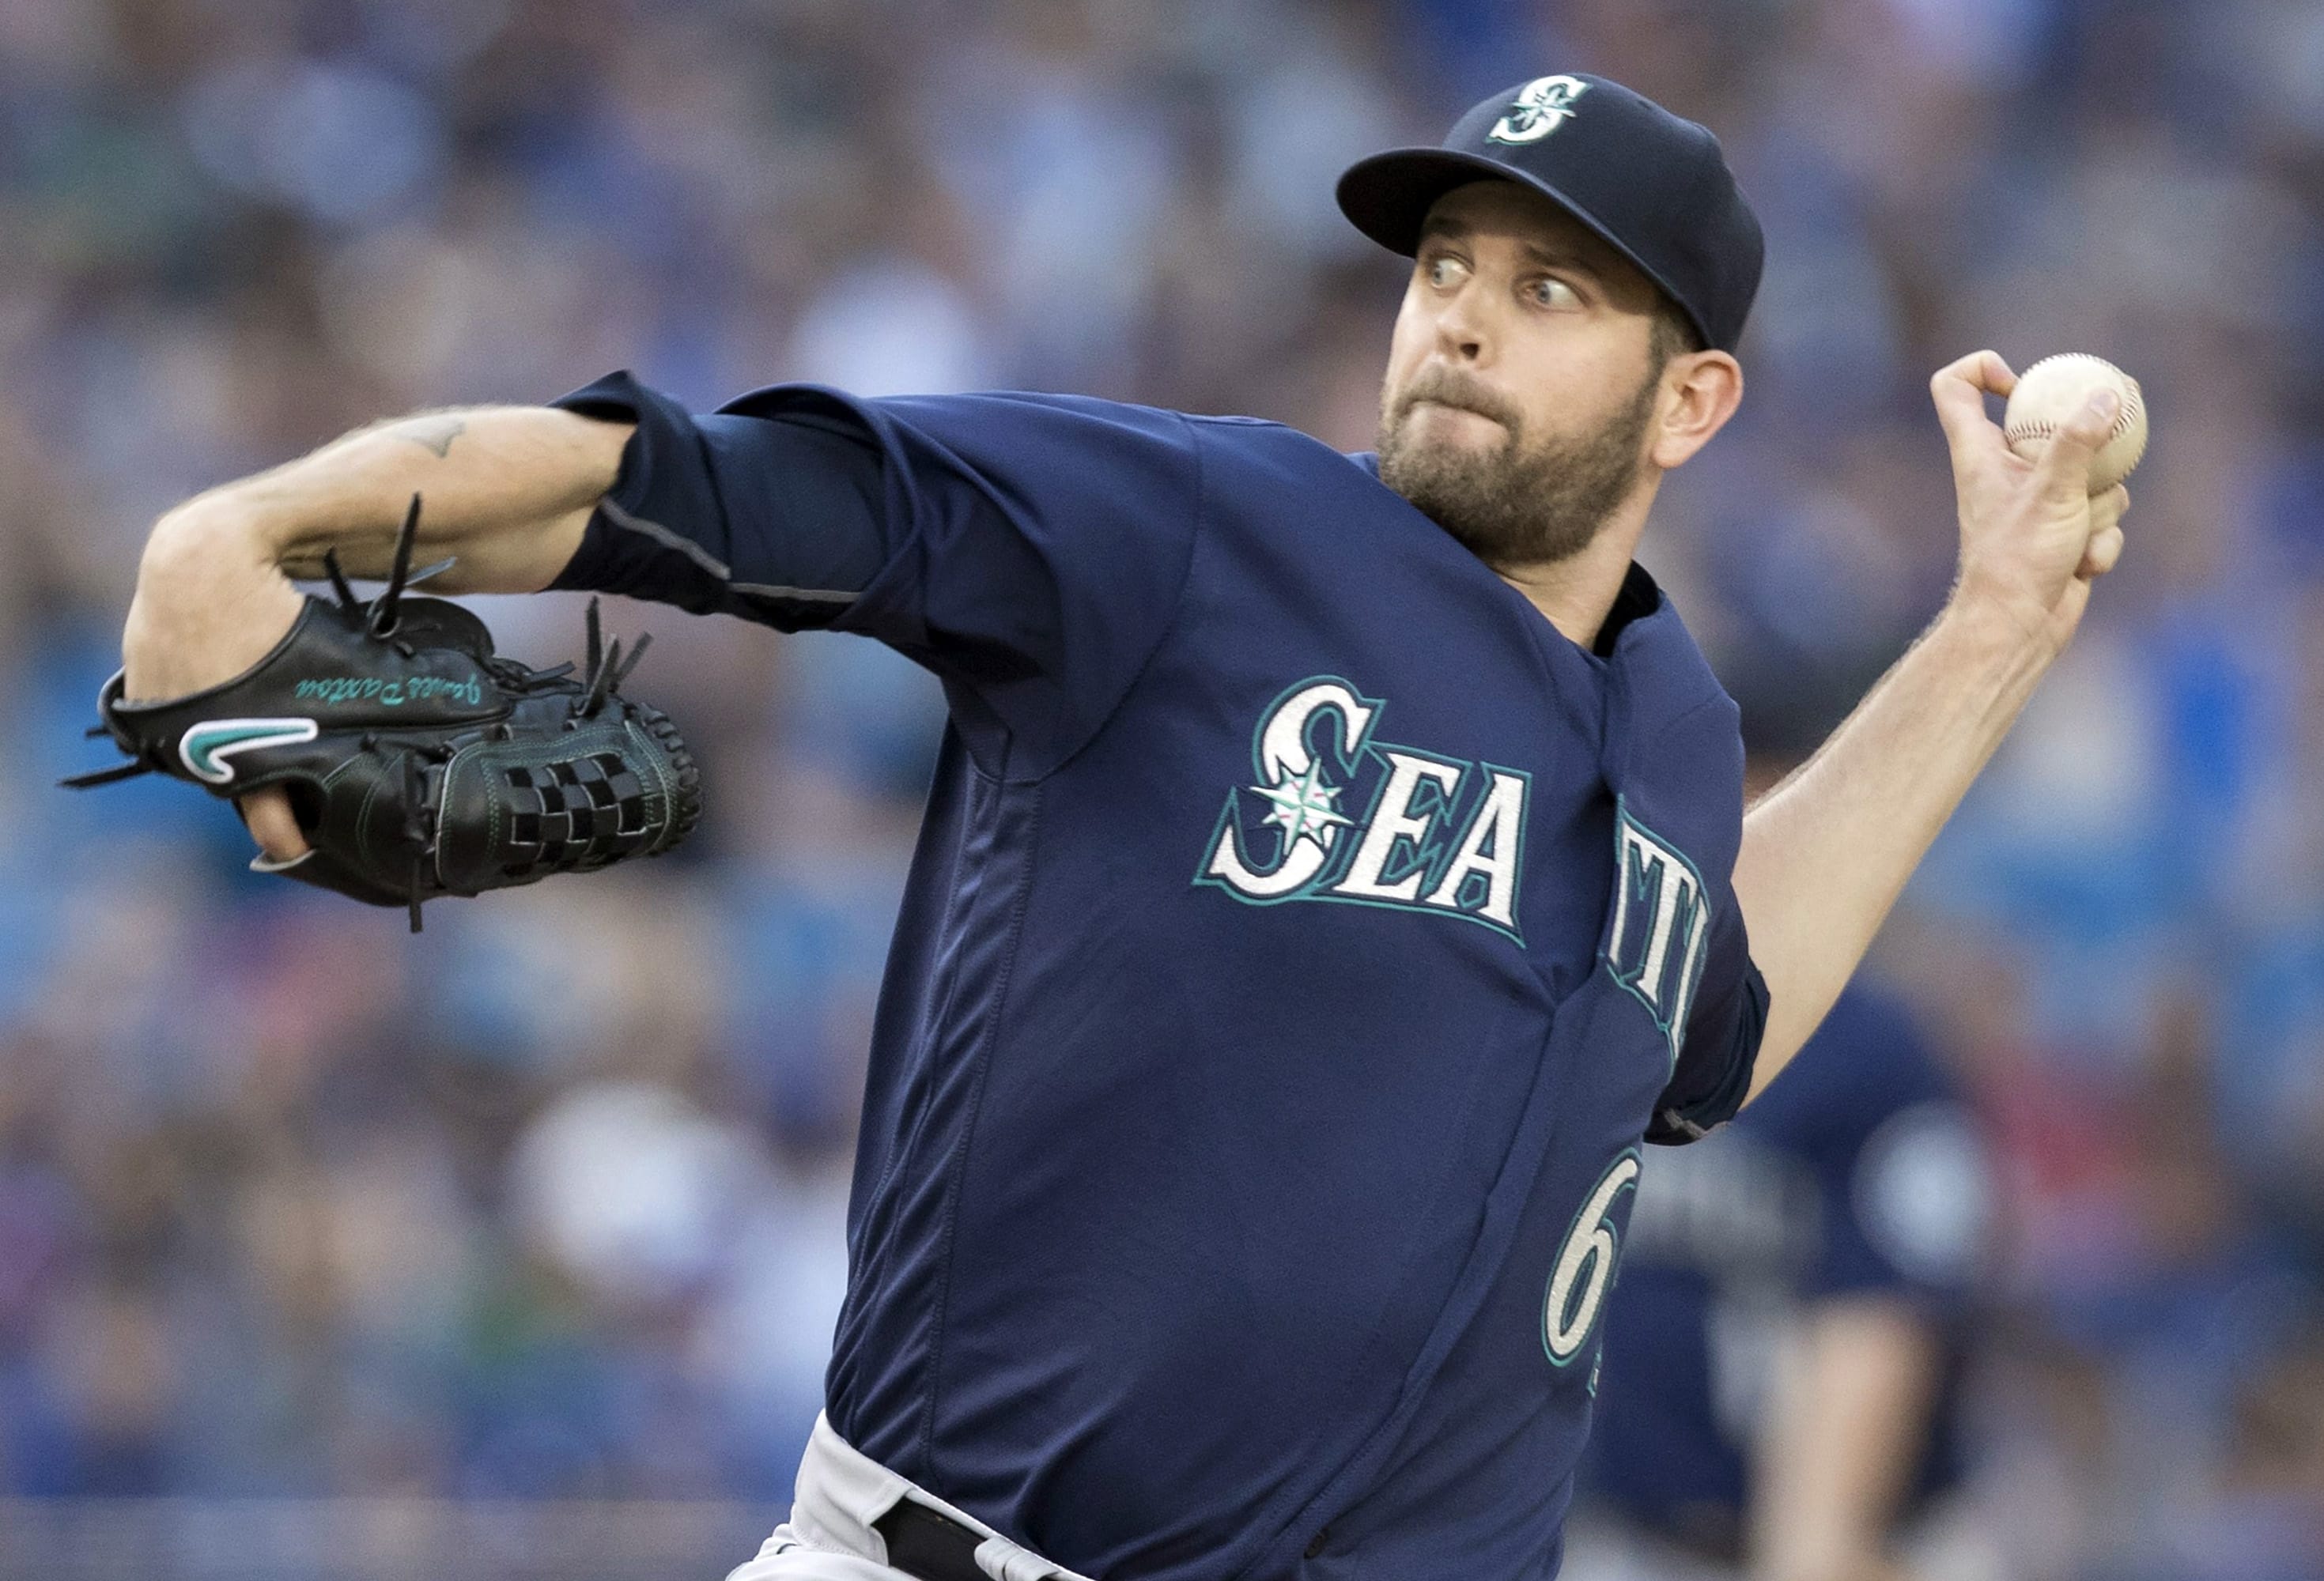 Seattle Mariners starting pitcher James Paxton throws against the Toronto Blue Jays during the first inning of a baseball game in Toronto, Friday, July 22, 2016.